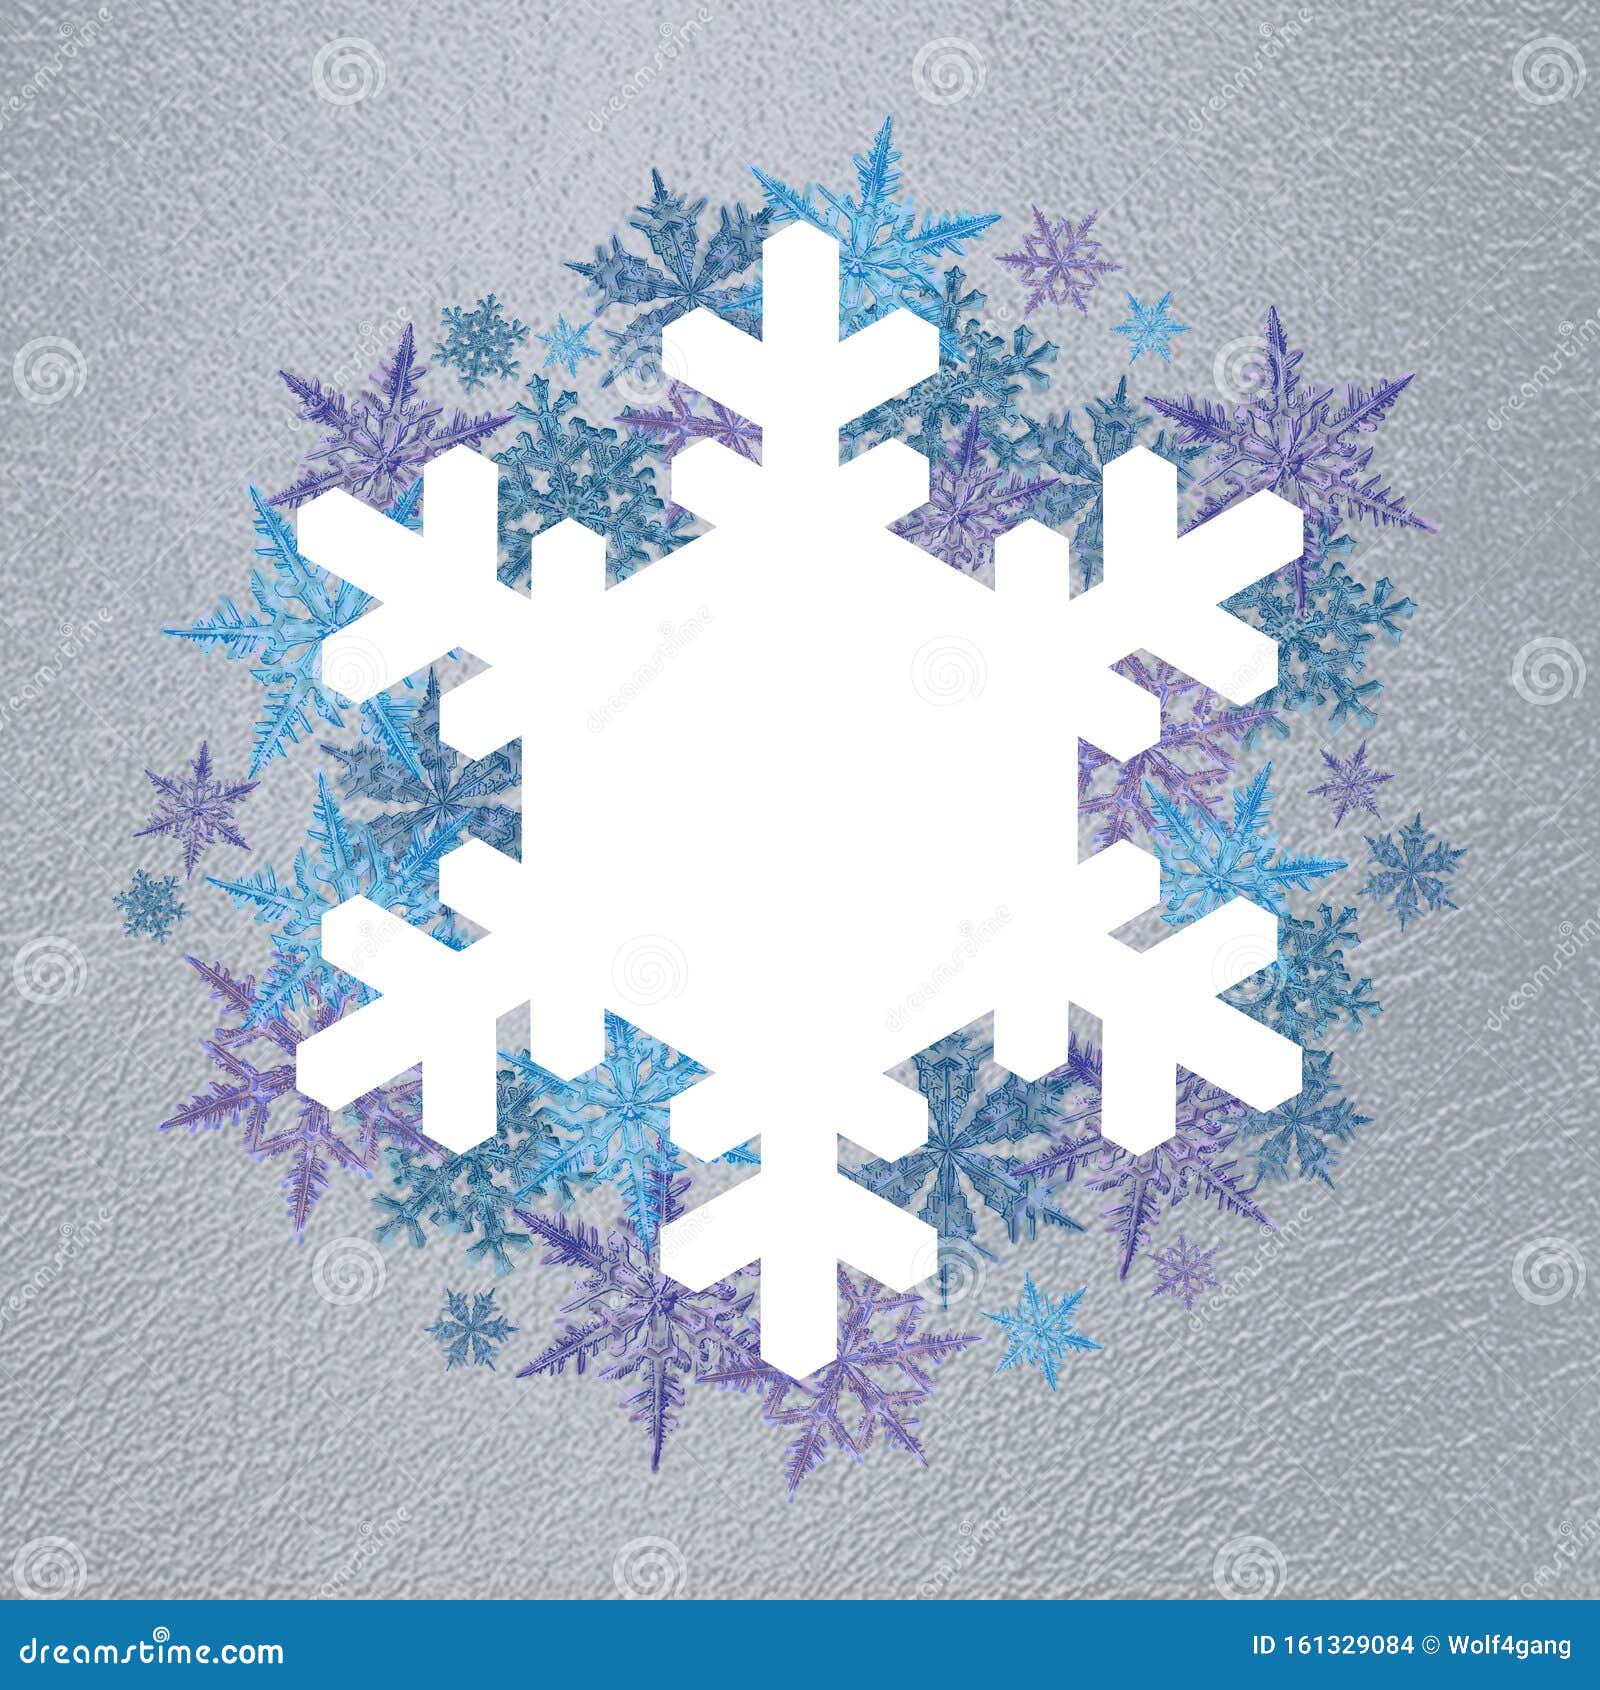 Snowflake Template Decorated with Blue Watercolor Snowflakes on Pertaining To Blank Snowflake Template